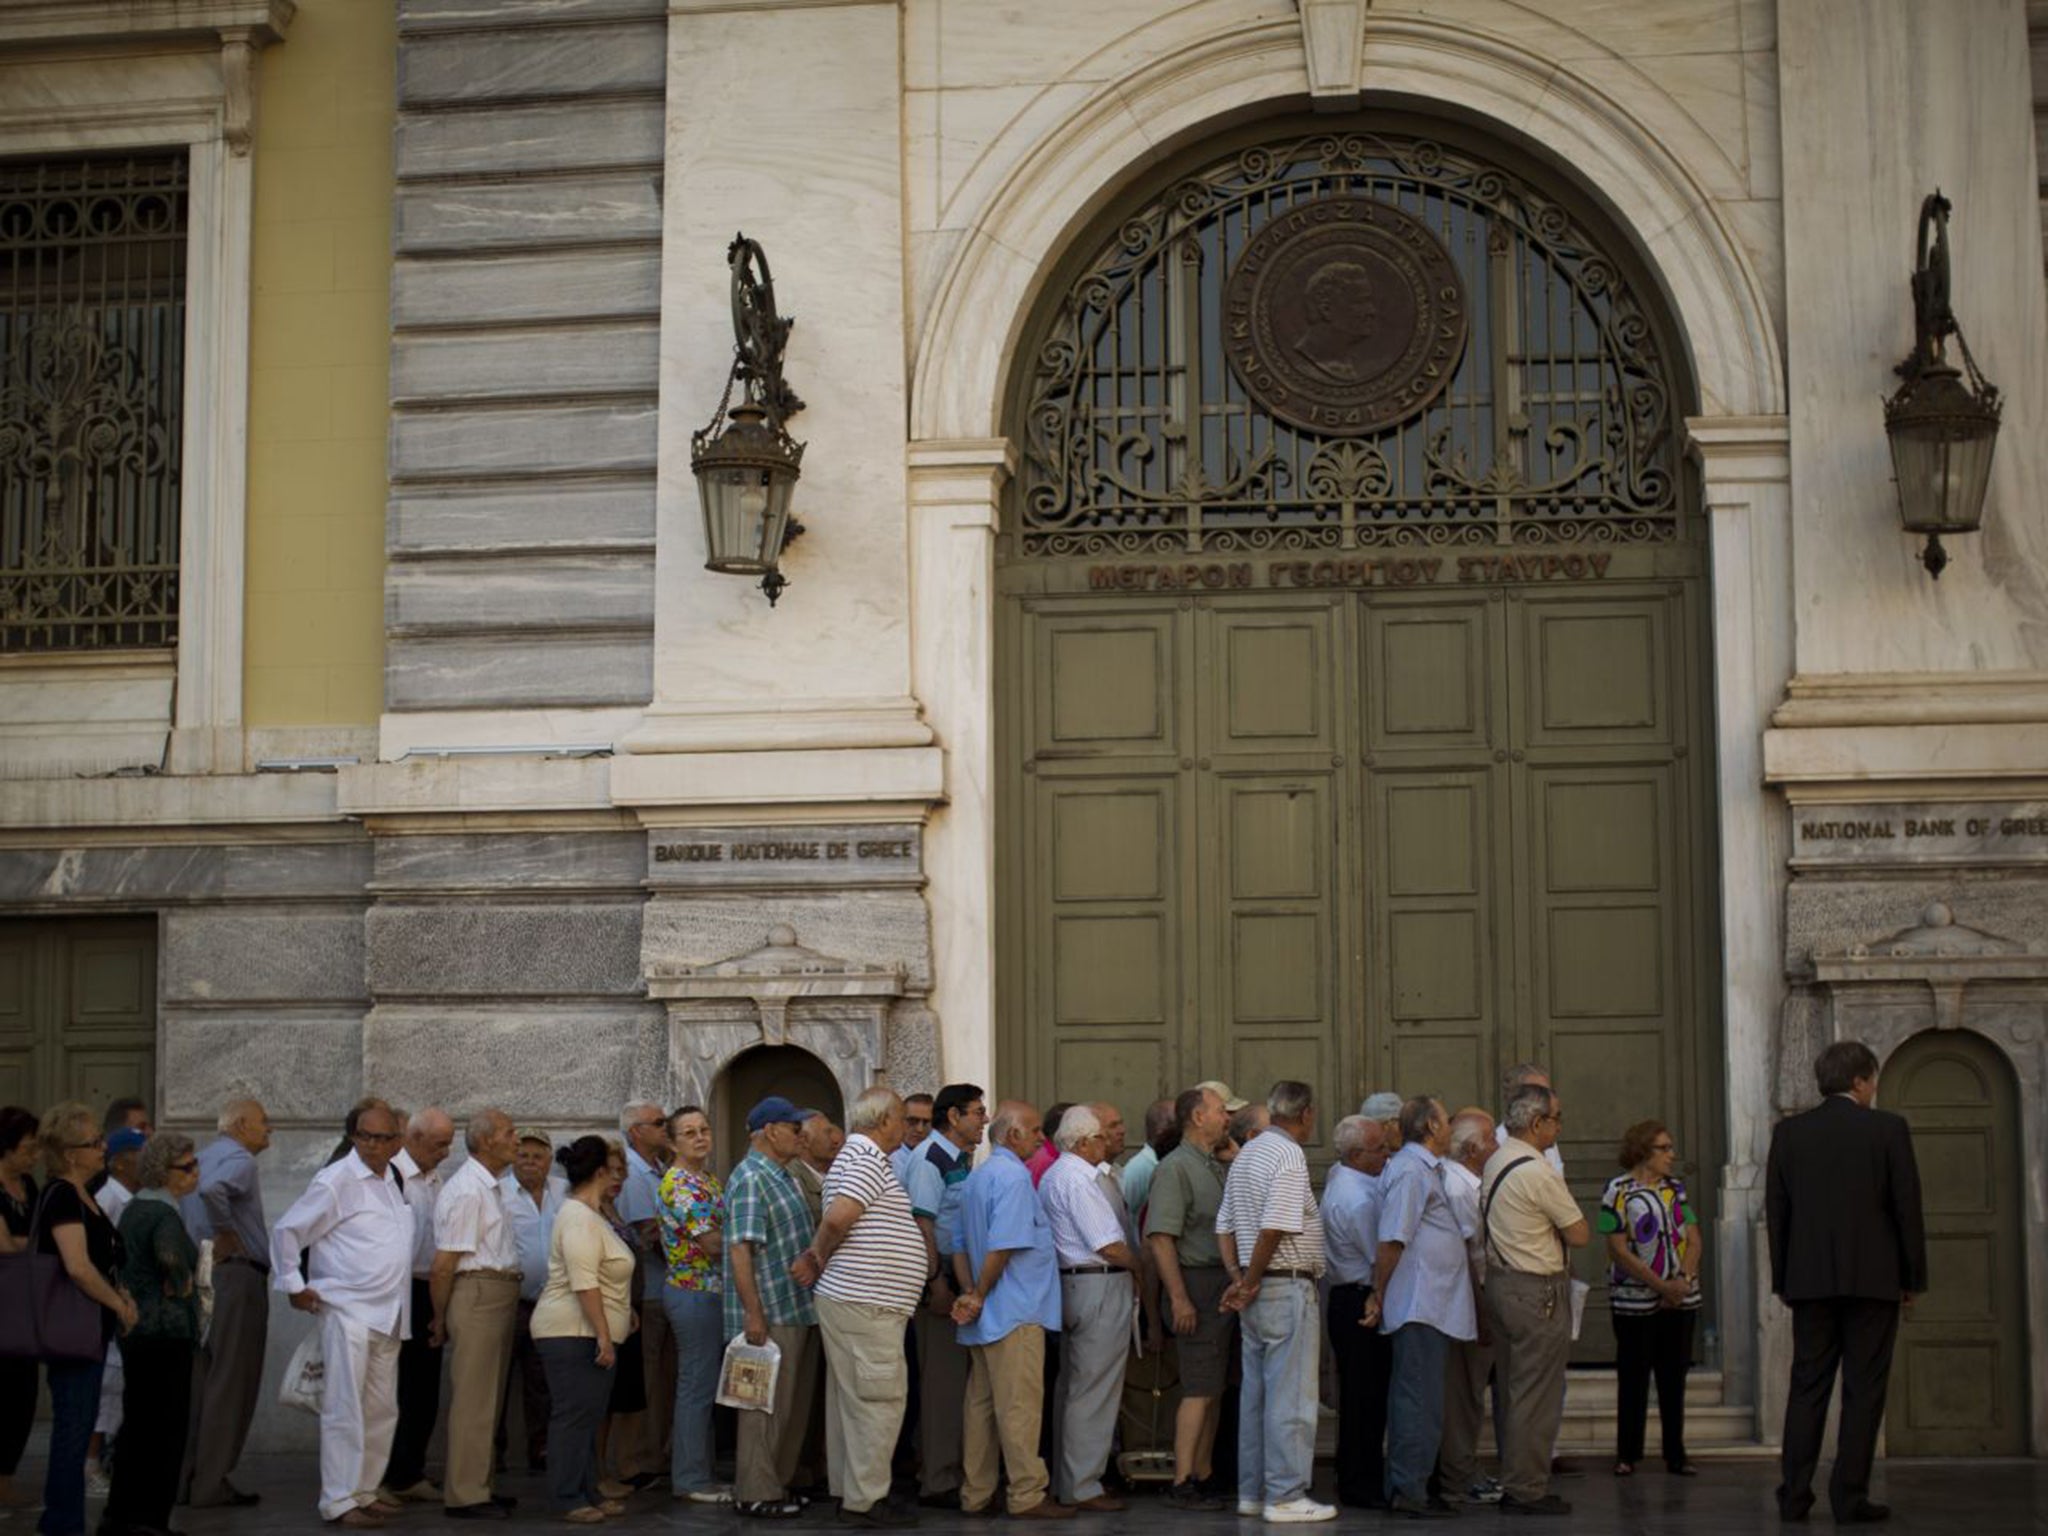 Pensioners wait outside the national bank of Greece. Shuttered banks are a striking physical symbol of economic disaster, but even they are not proof that the final dénouement is at hand